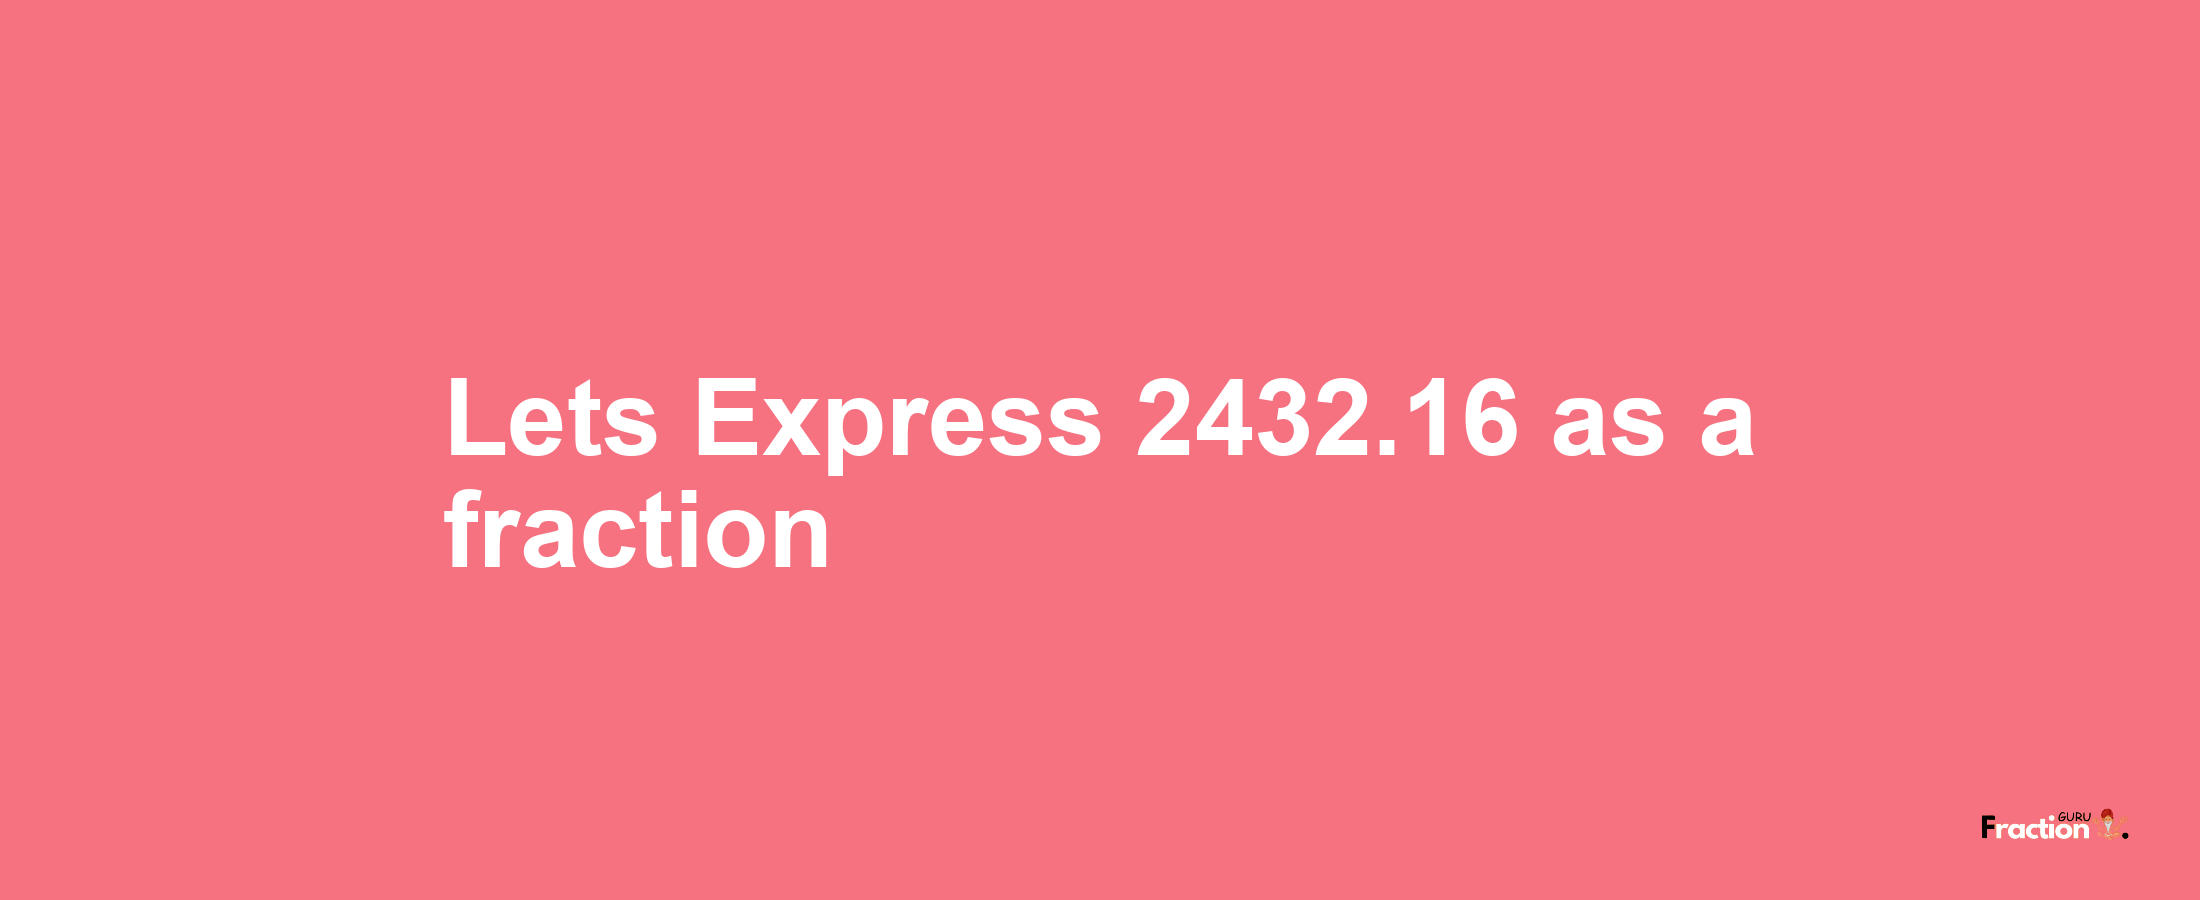 Lets Express 2432.16 as afraction